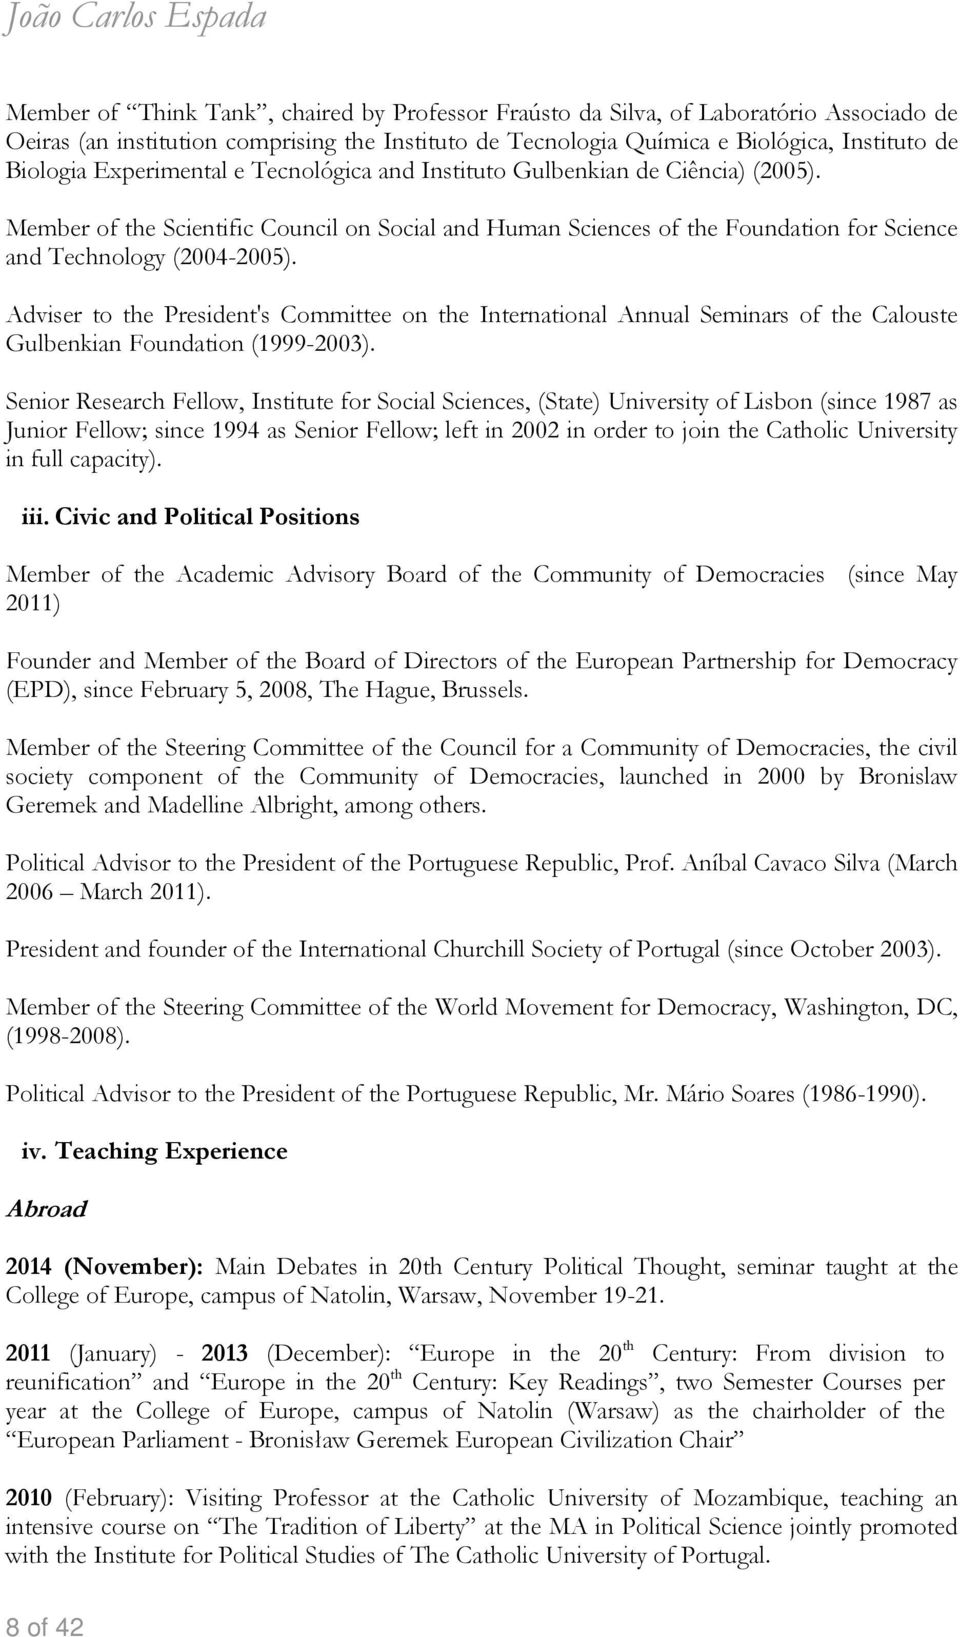 Adviser to the President's Committee on the International Annual Seminars of the Calouste Gulbenkian Foundation (1999-2003).